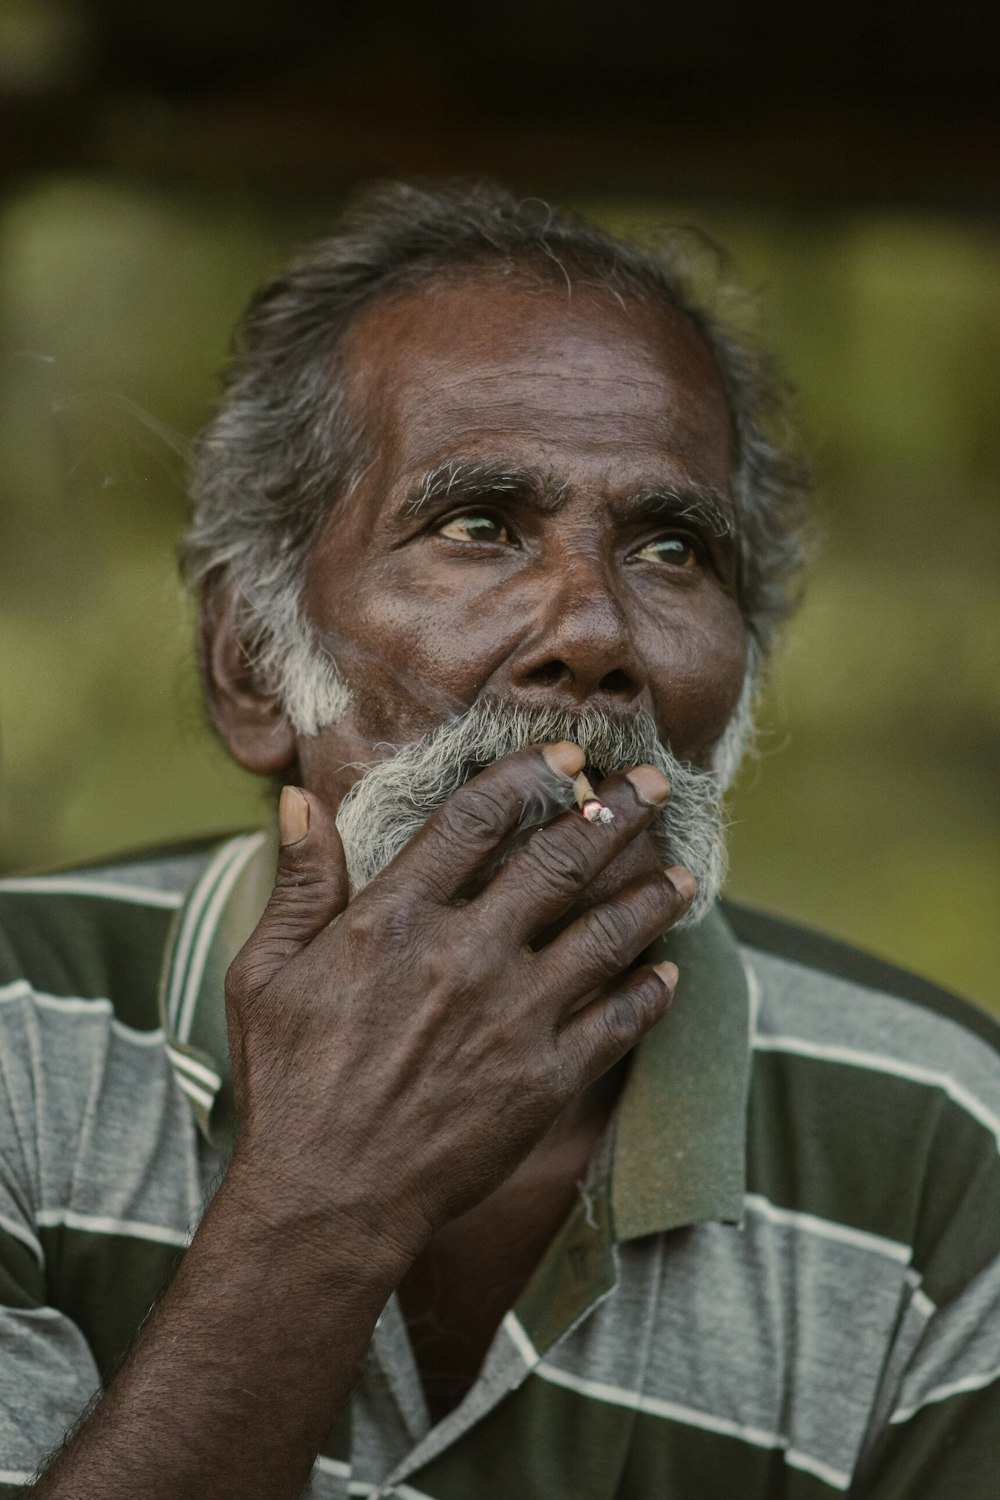 an old man with a moustache smoking a cigarette